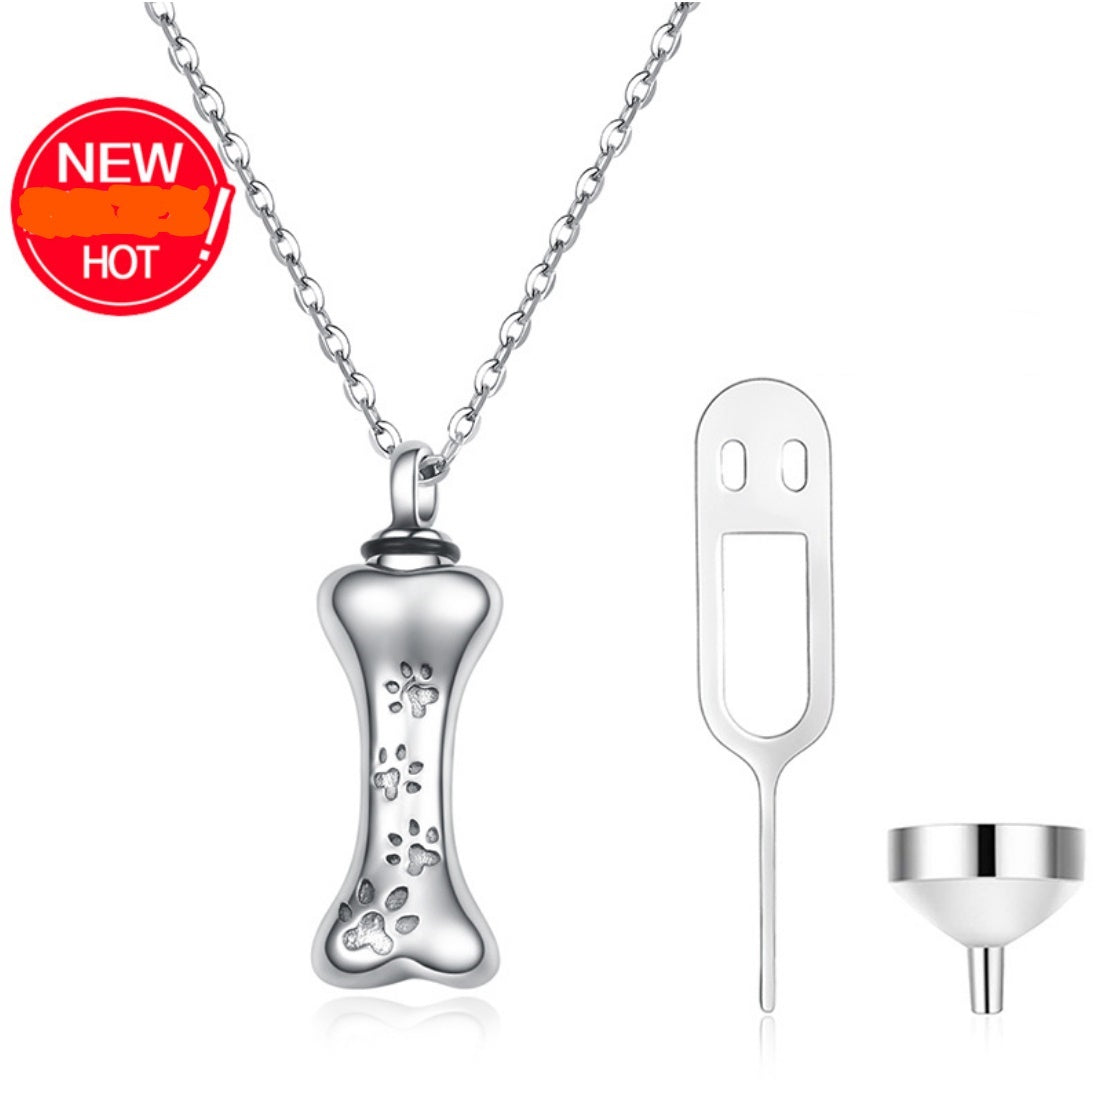 YFN Urn Bone shaped Necklace for Ashes / Perfume, Urn Necklaces Cremation Jewelry, stay with me forever, memorial necklace